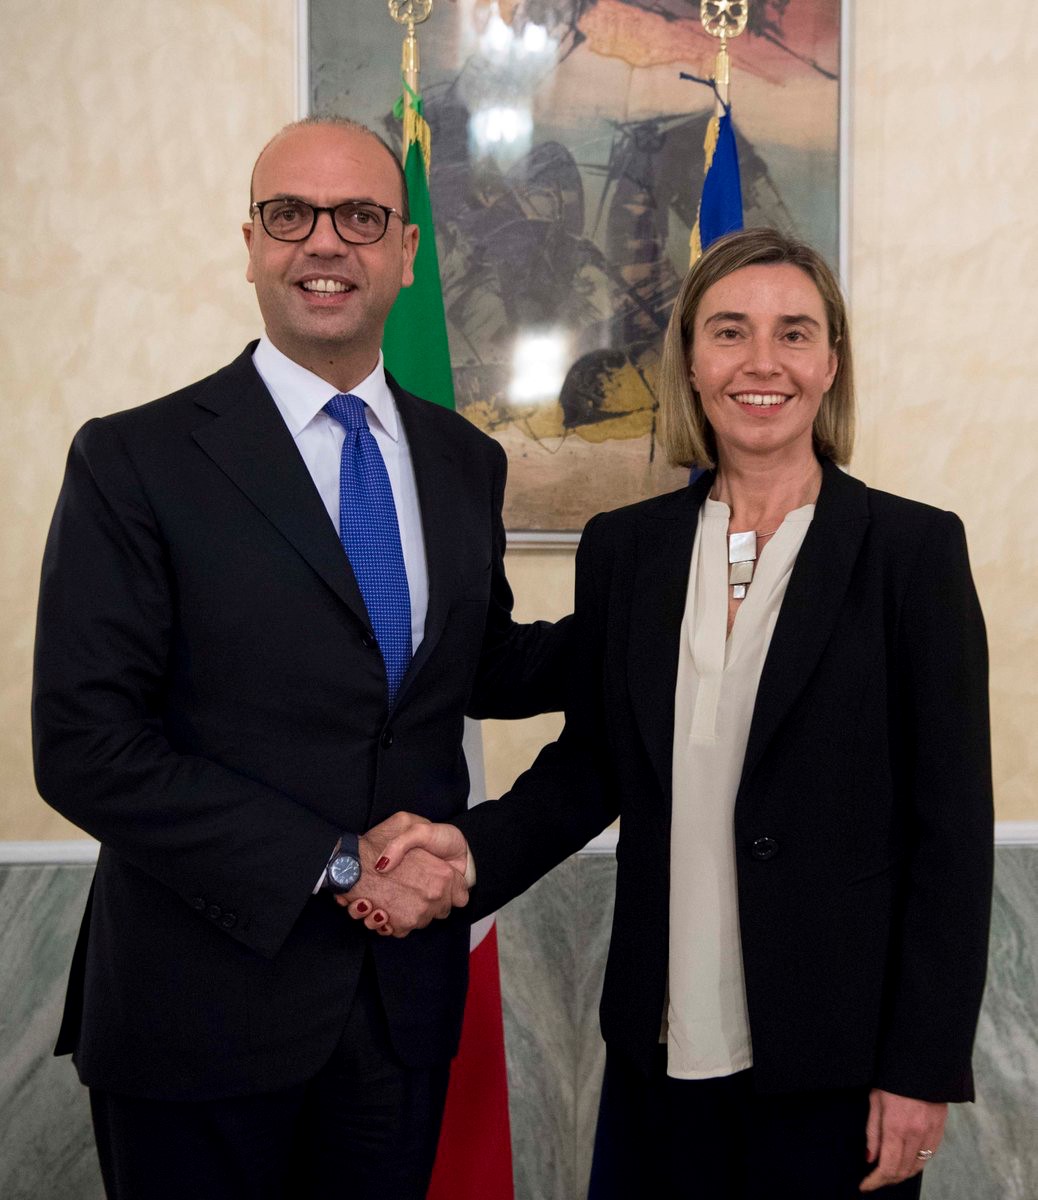 High Representative of the Union for Foreign Affairs and Security Policy Federica Mogherini with Italian Minister of Foreign Affairs and International Cooperation Angelino Alfano